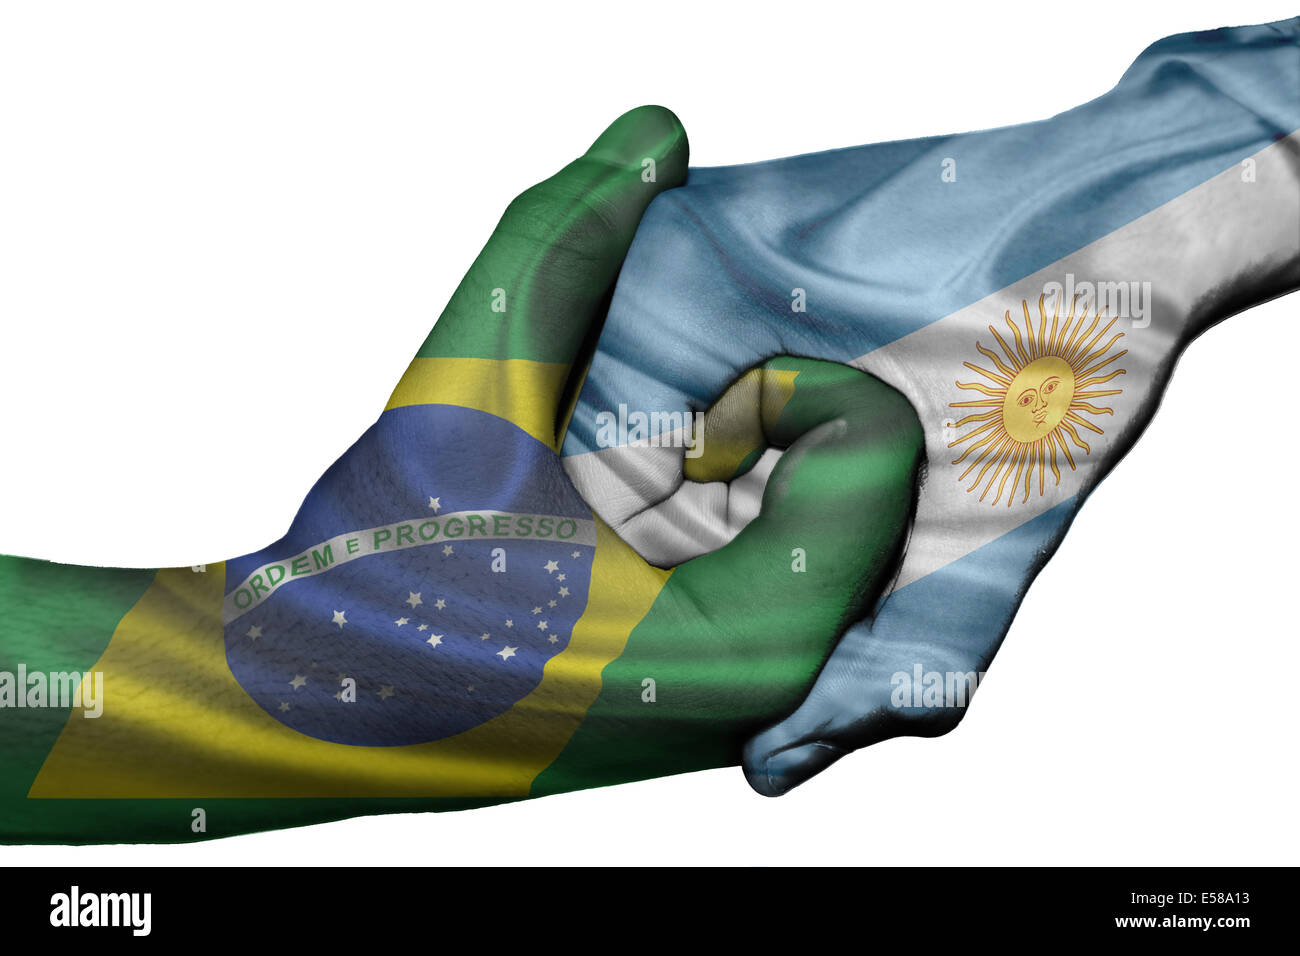 Diplomatic handshake between countries: flags of Brazil and Argentina overprinted the two hands Stock Photo